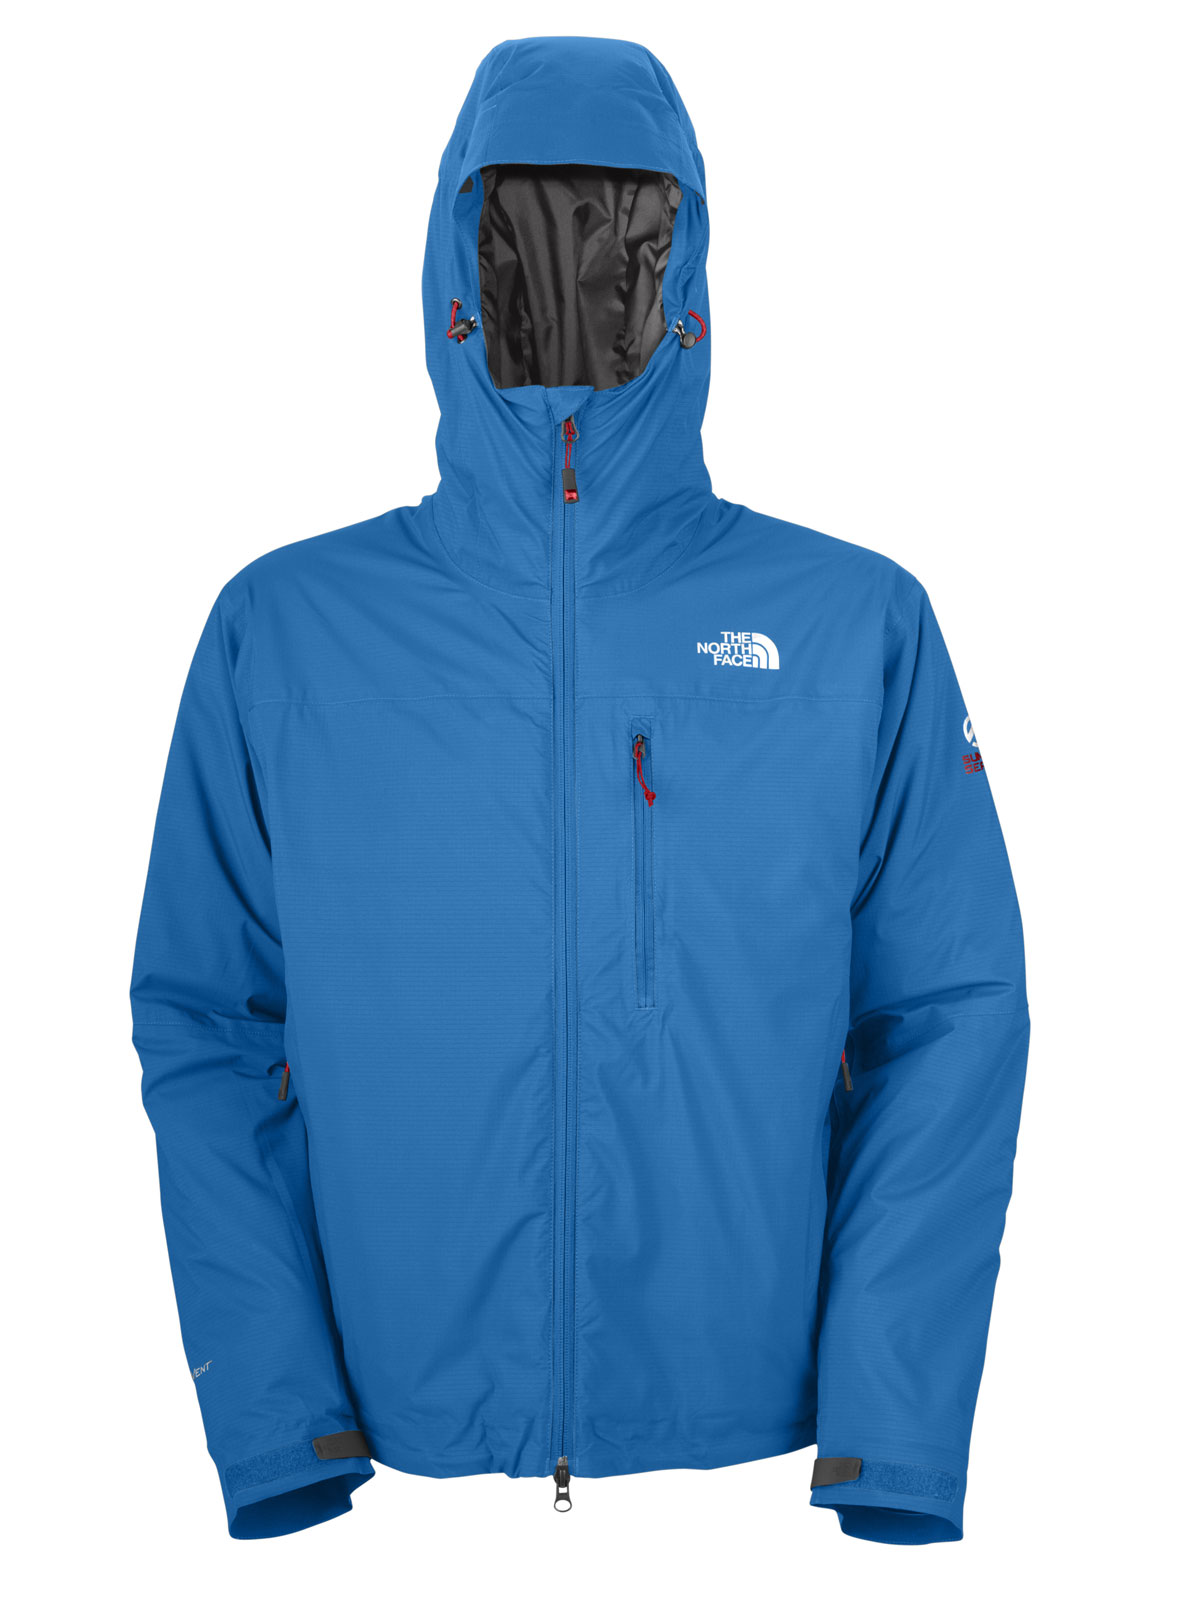 The North Face Makalu Insulated Jacket Men's at NorwaySports.com